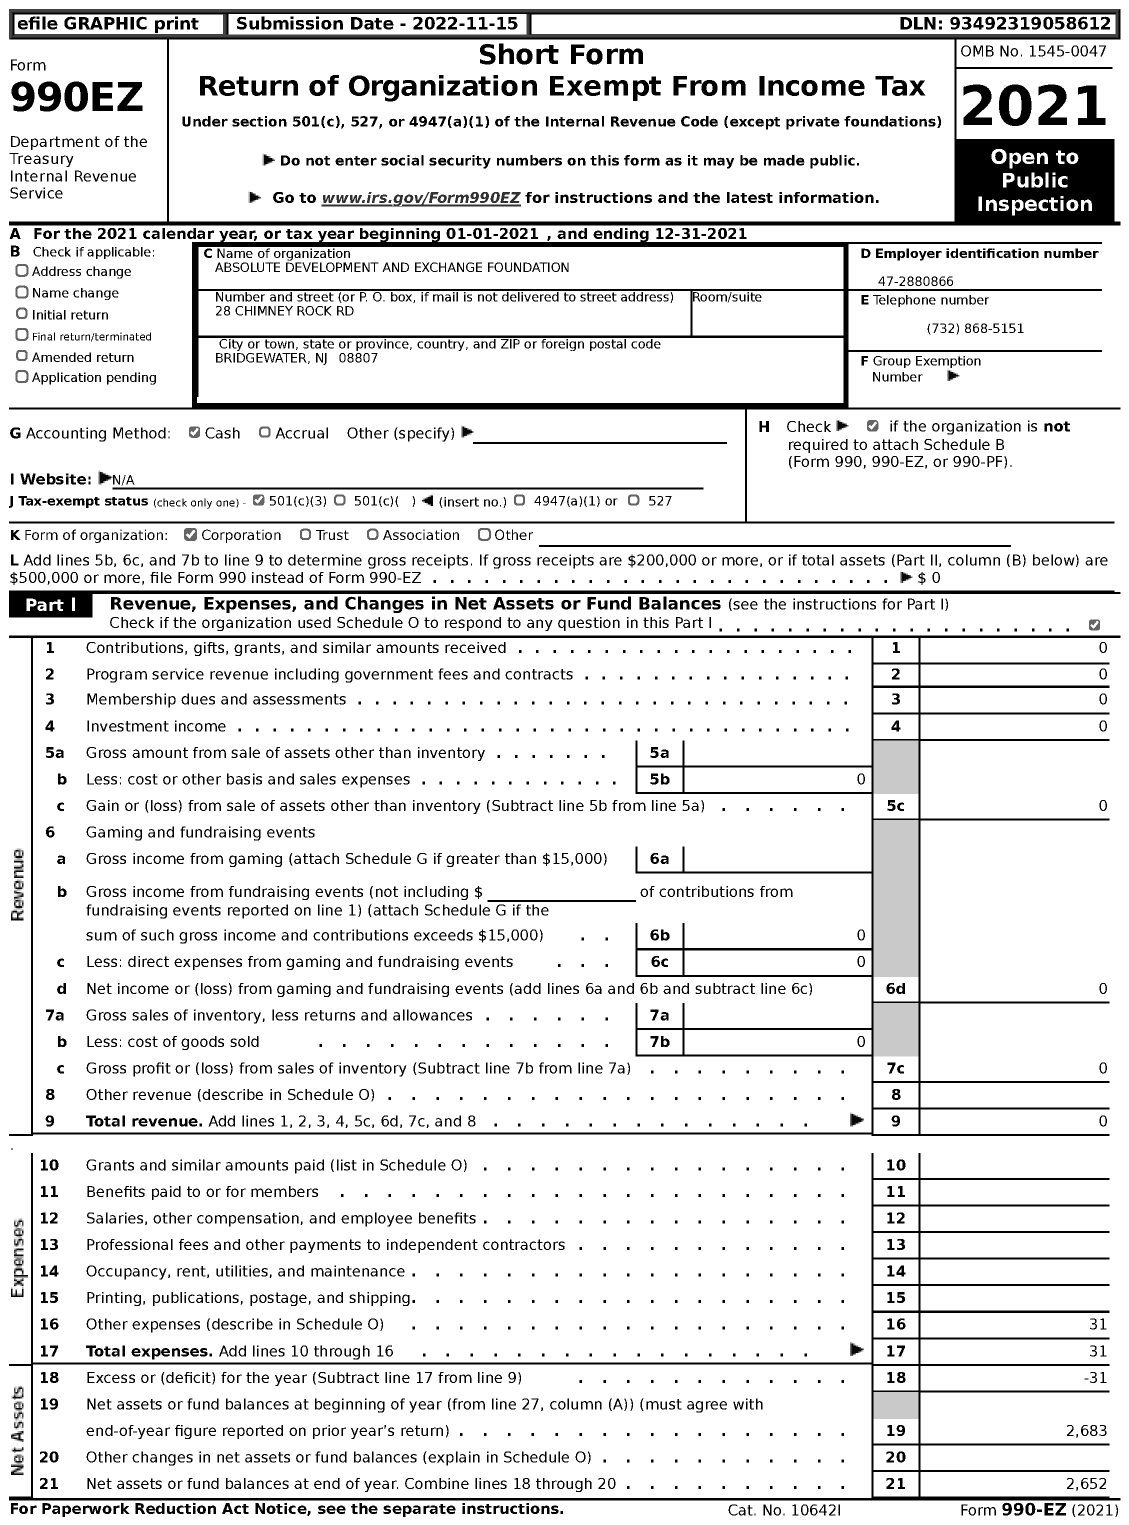 Image of first page of 2021 Form 990EZ for Absolute Development and Exchange Foundation